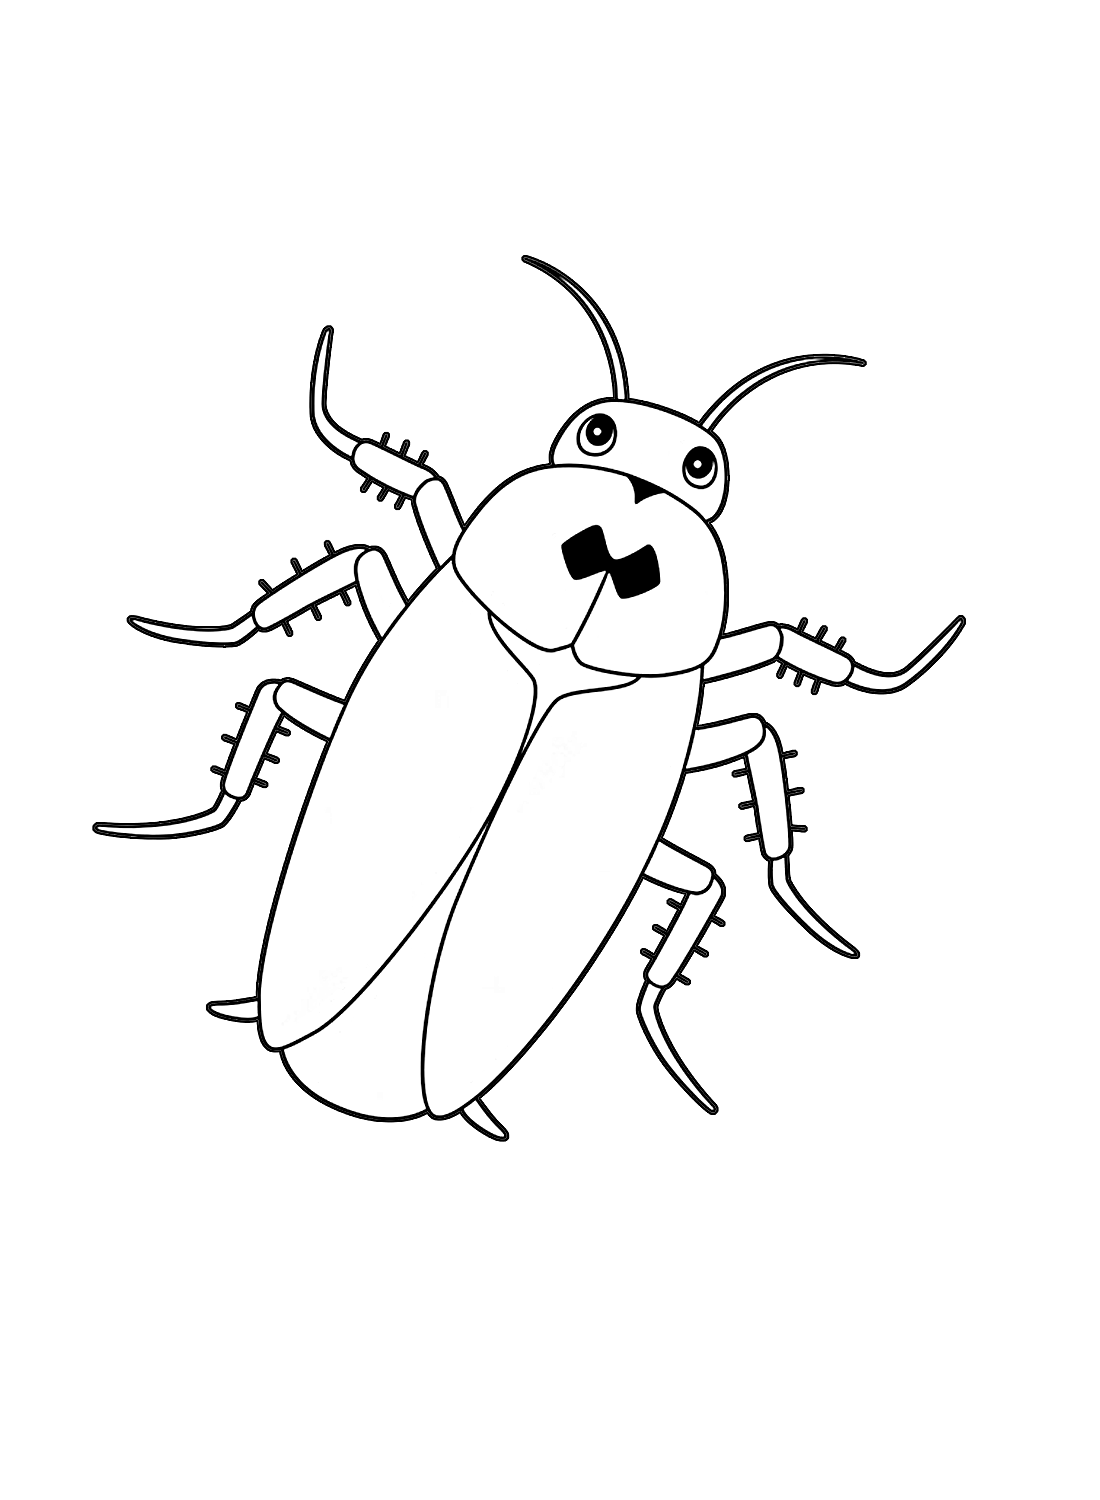 The cute Cockroach from Cockroach